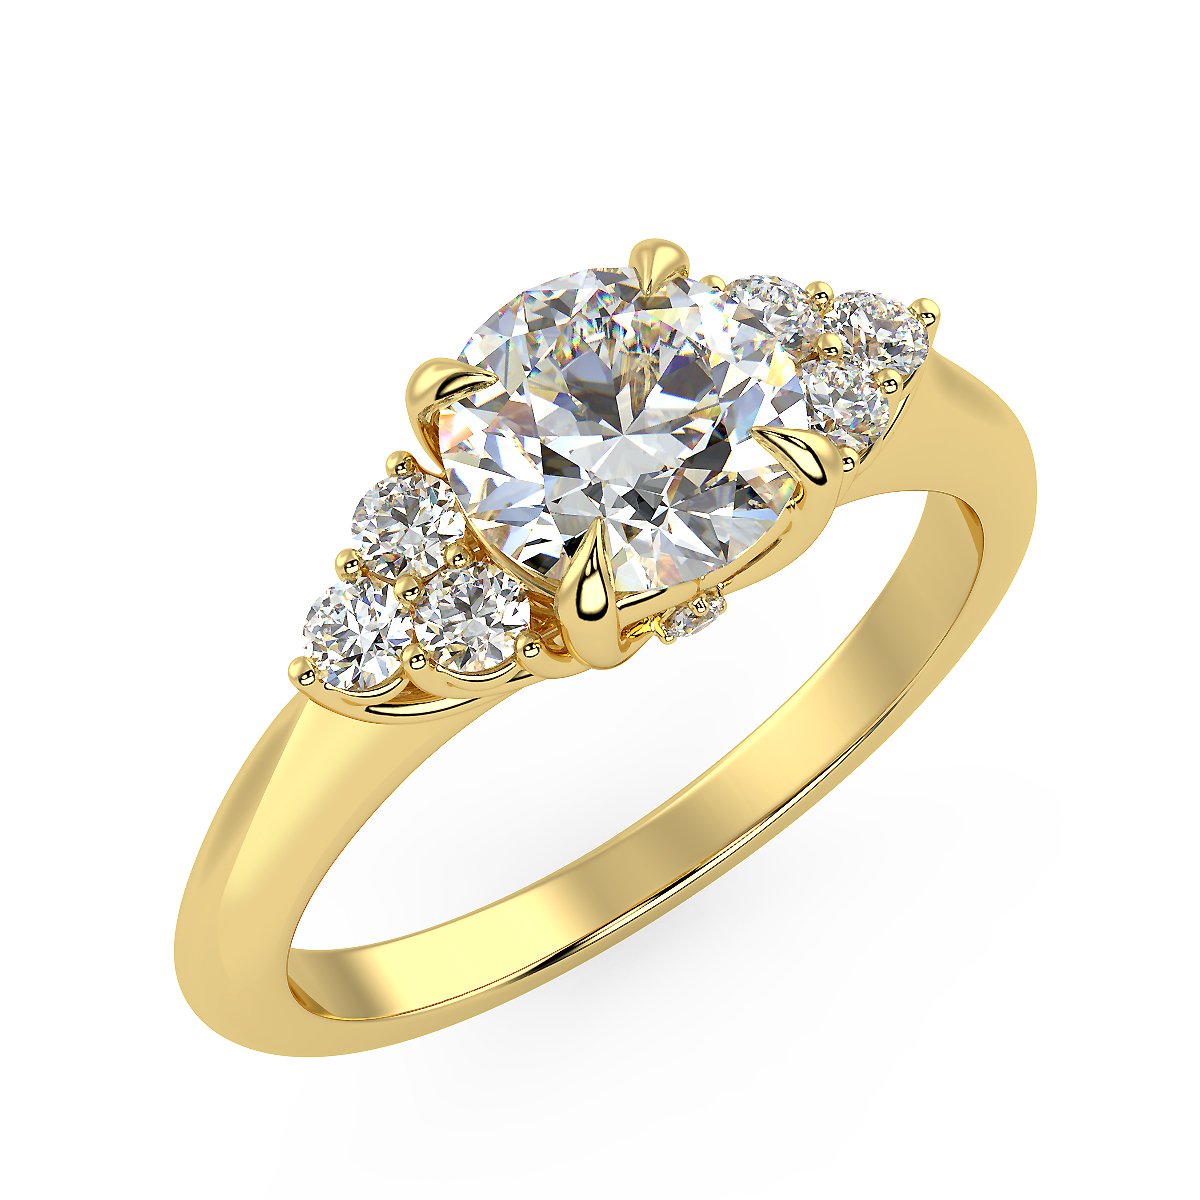 Zania Engagement Ring in Yellow Gold